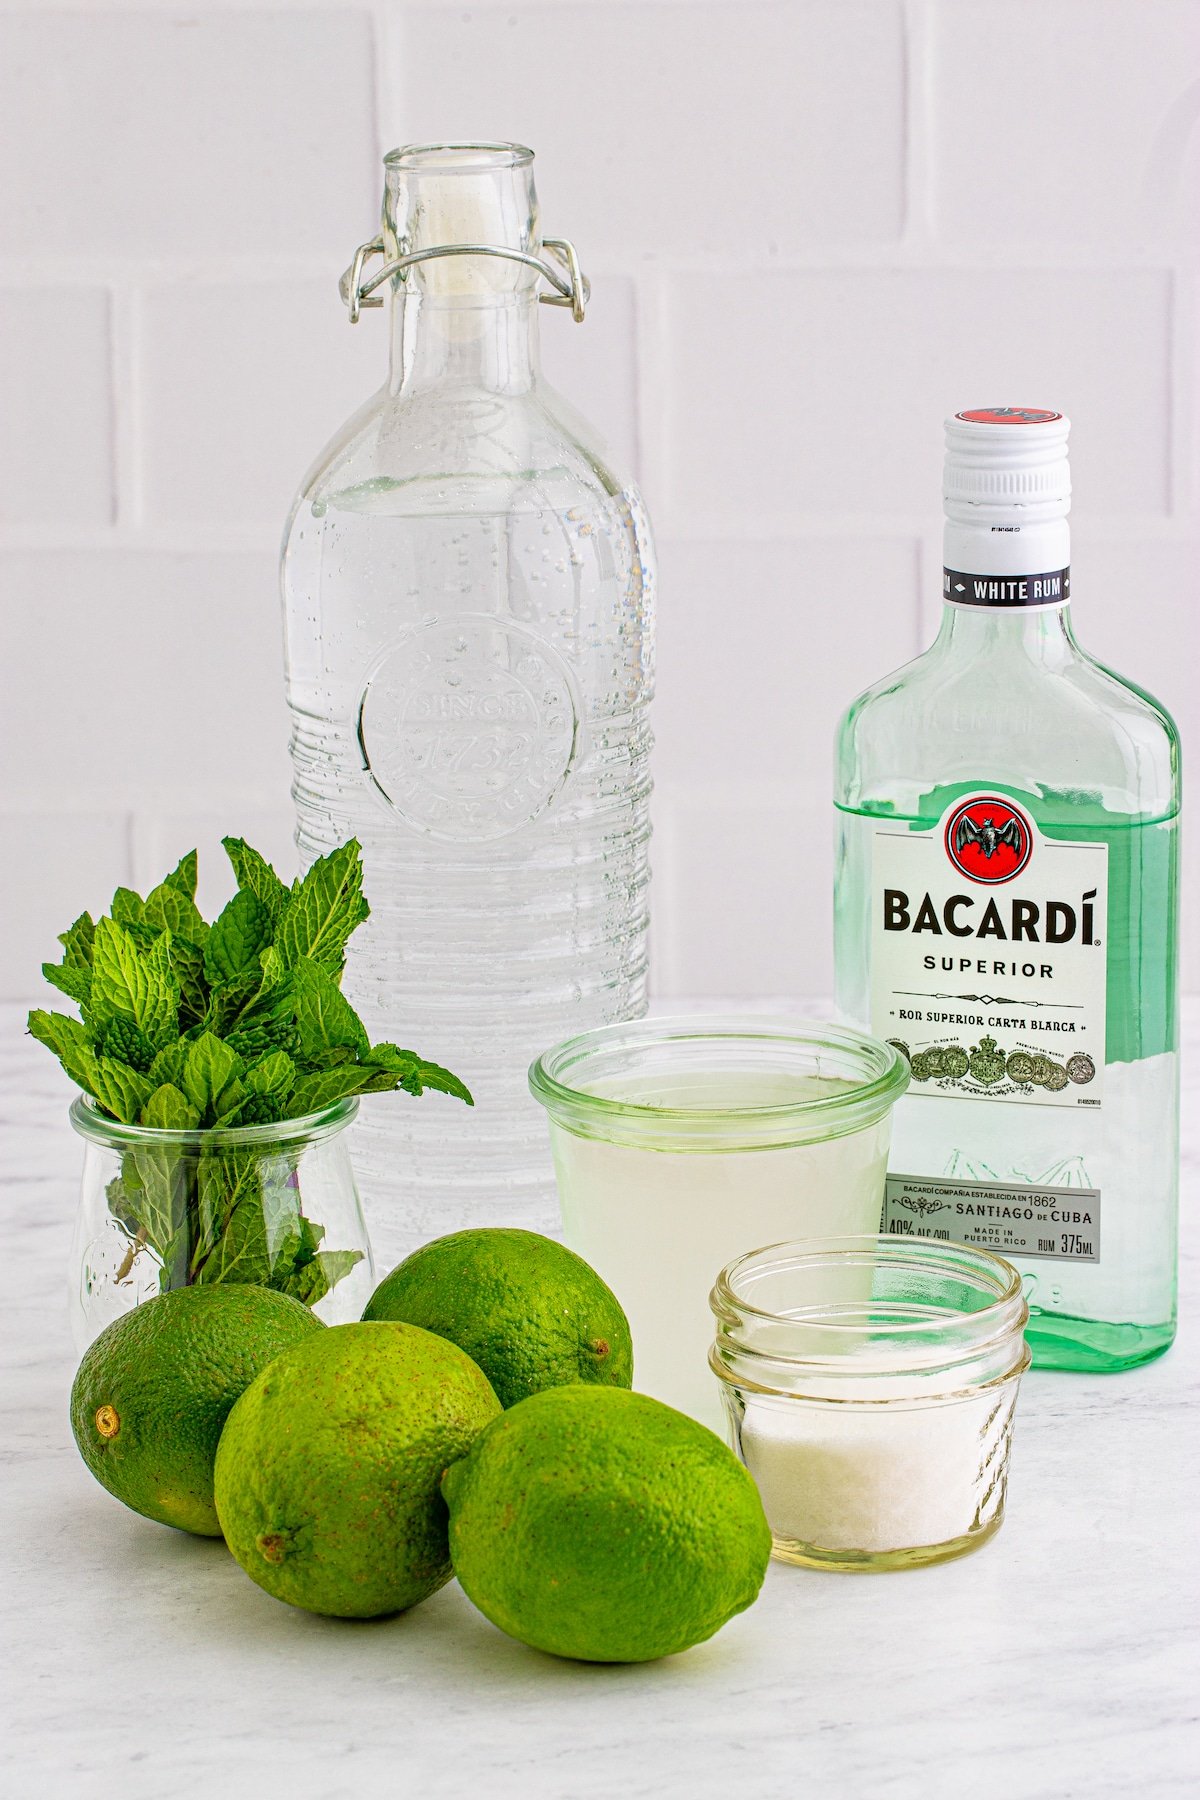 All the ingredients needed to make pitcher mojitos